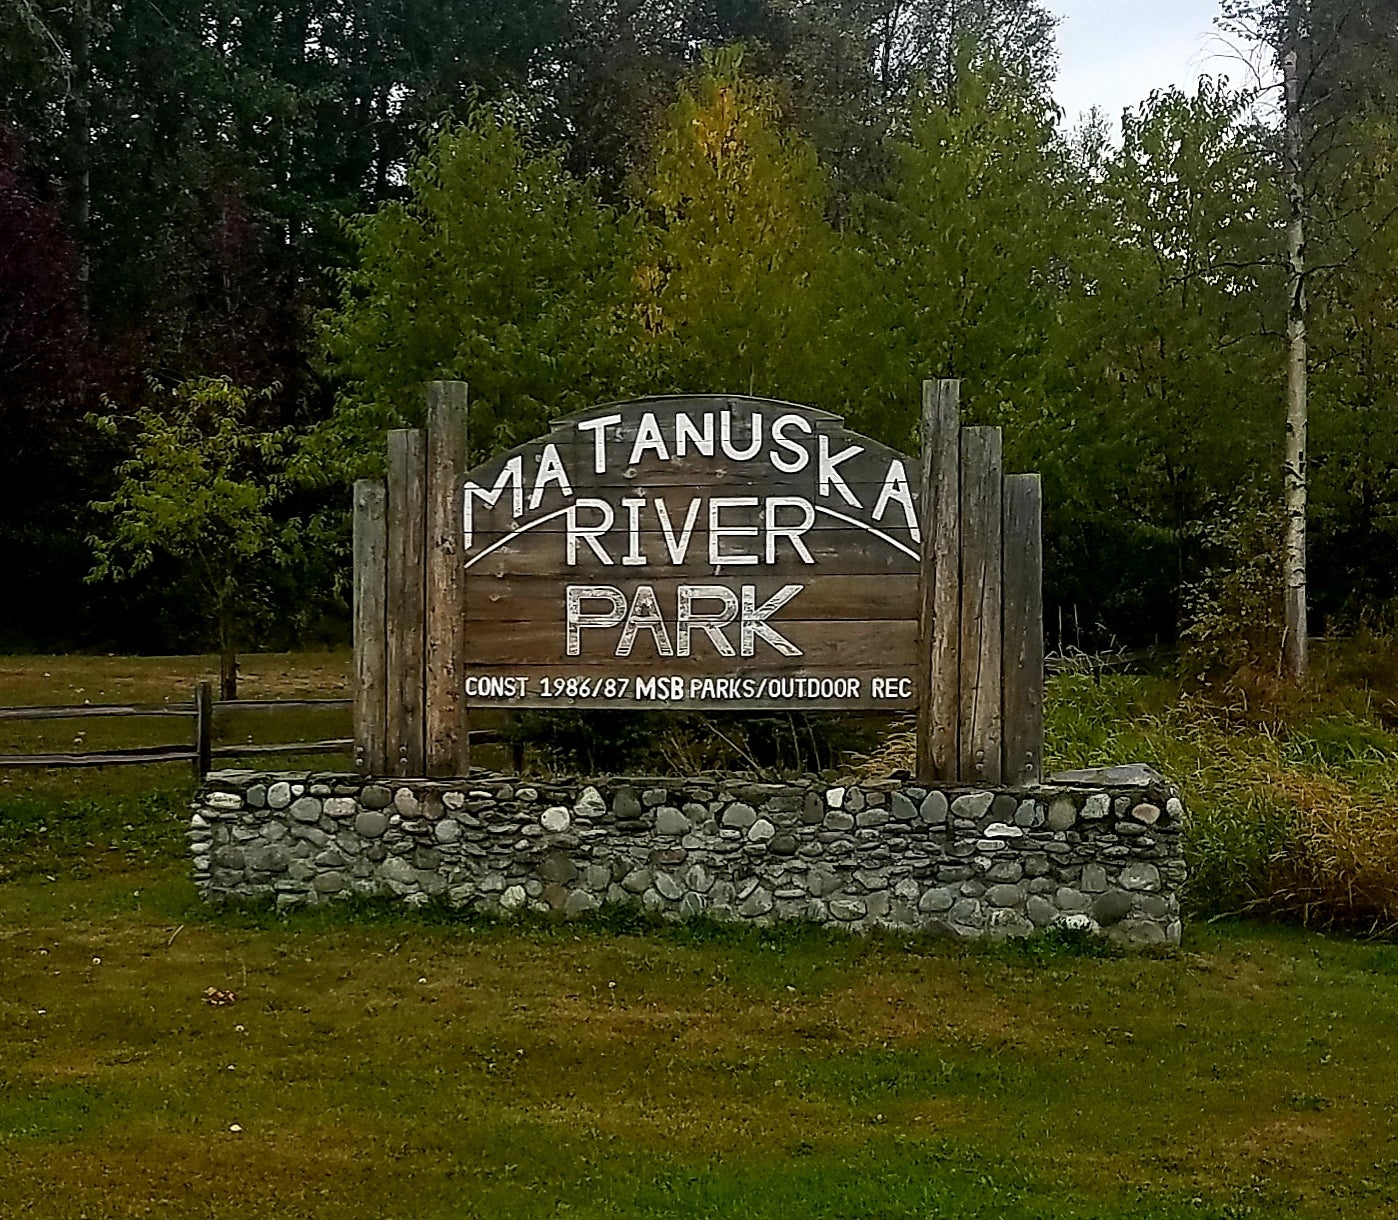 Camper submitted image from Matanuska River Park Campground - 4